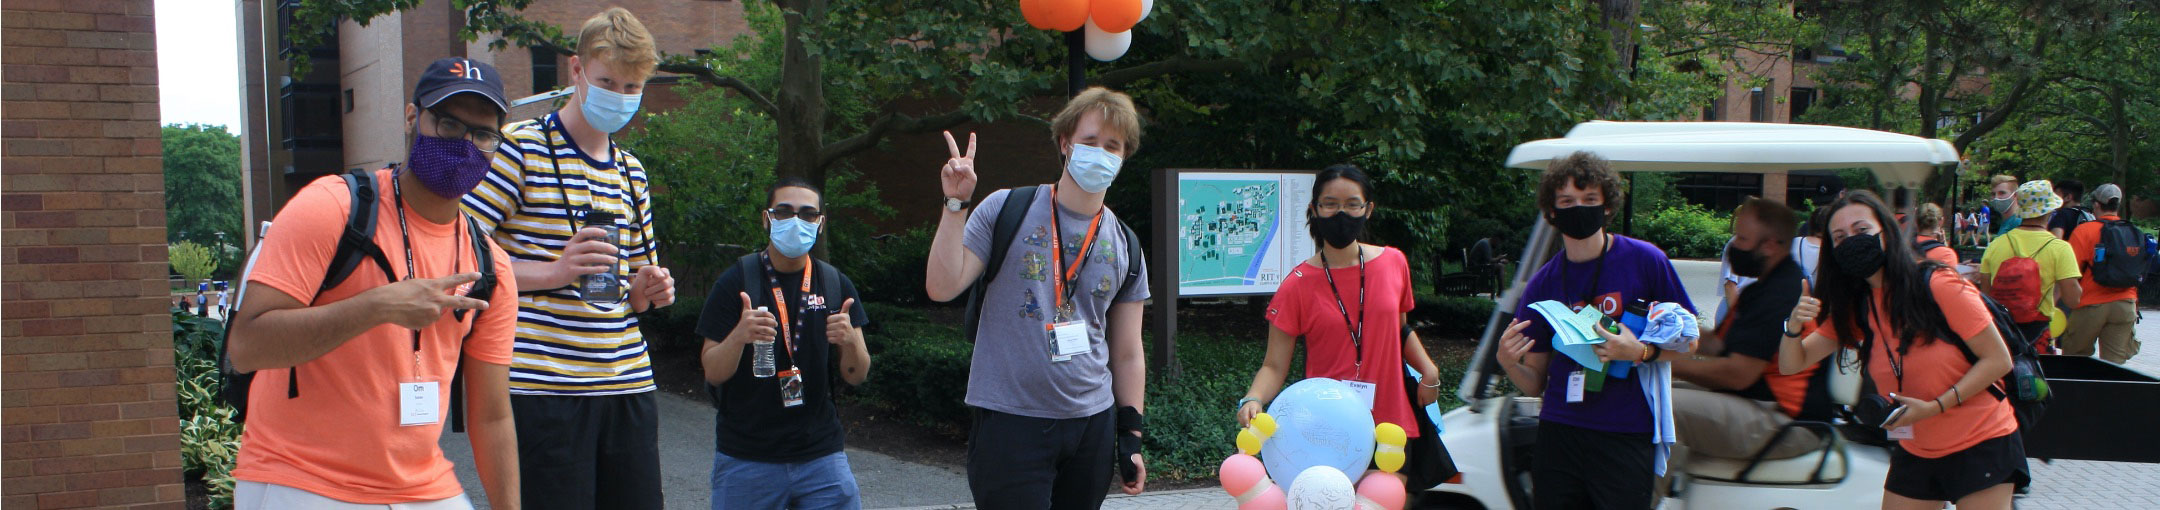 an image of multiple students outside mostly showing thumbs up or peace signs